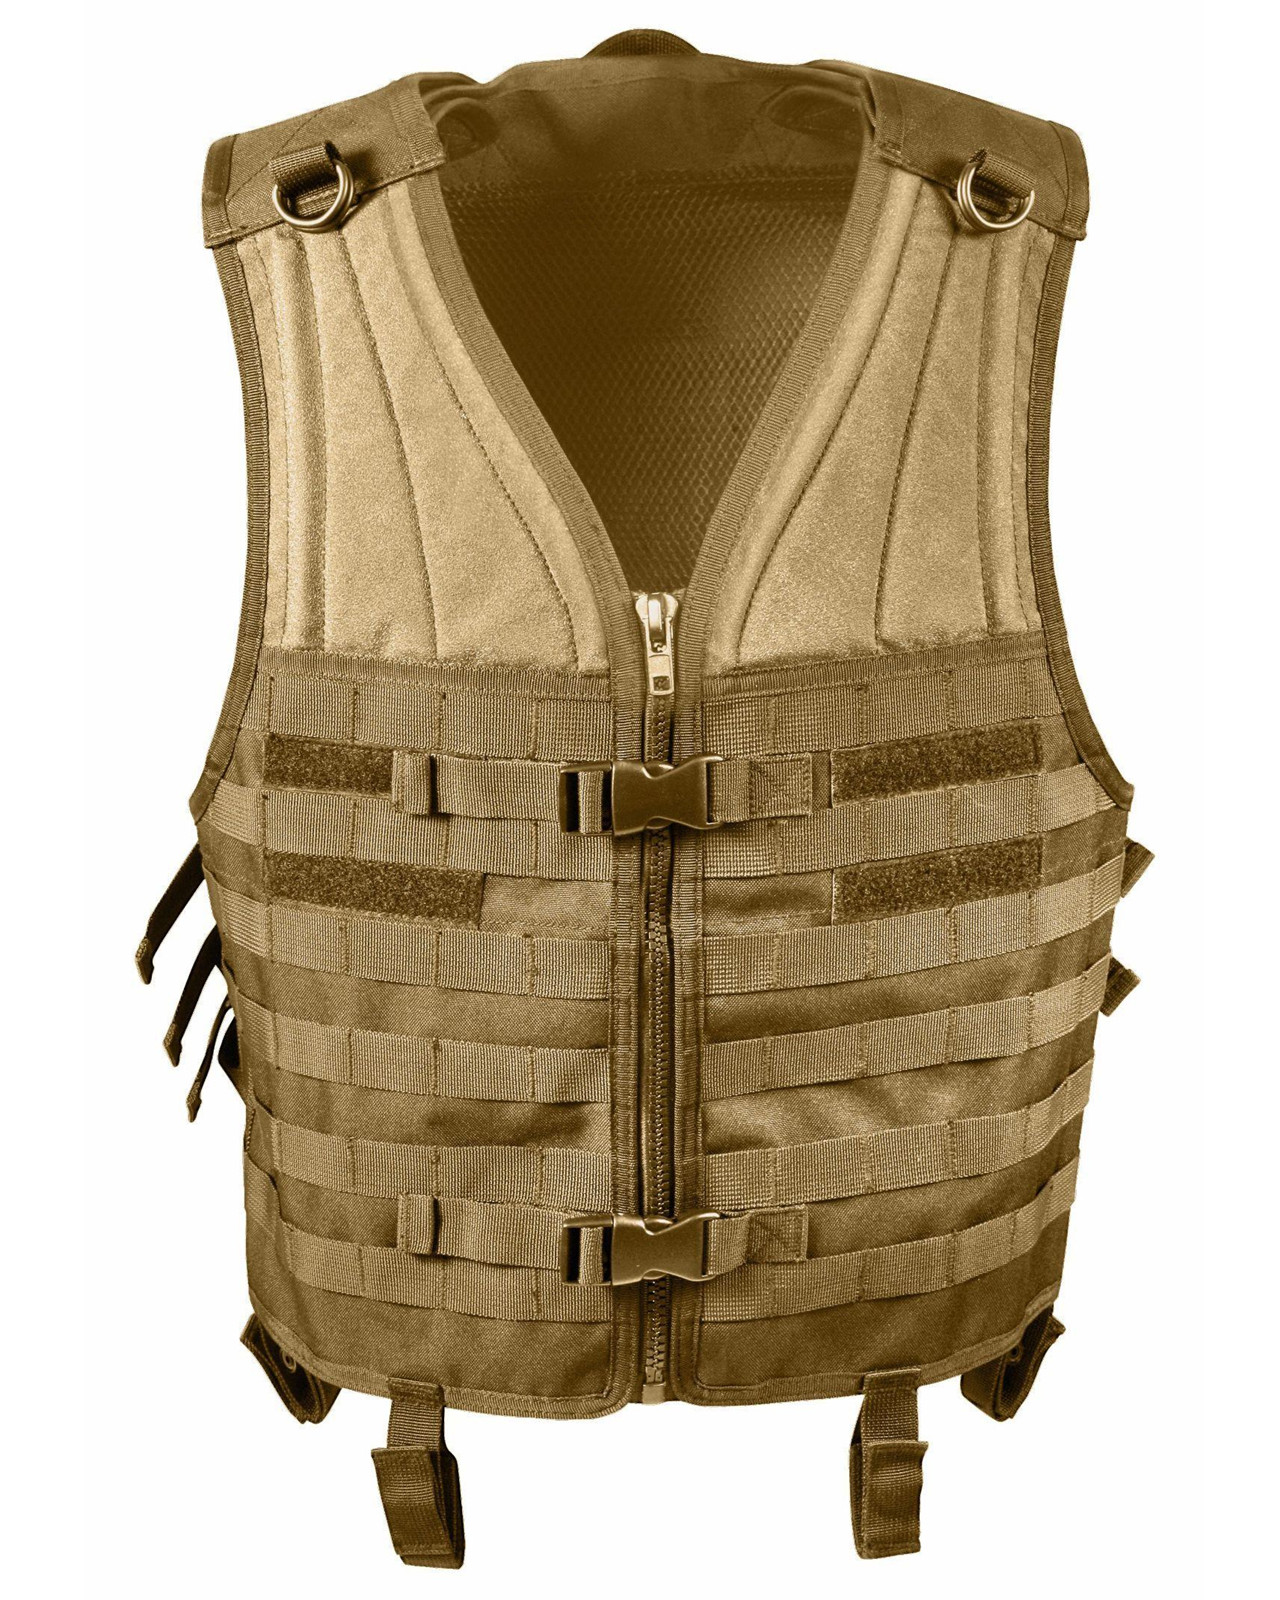 Rothco MOLLE Modular Vest (Coyote Brun, One Size)